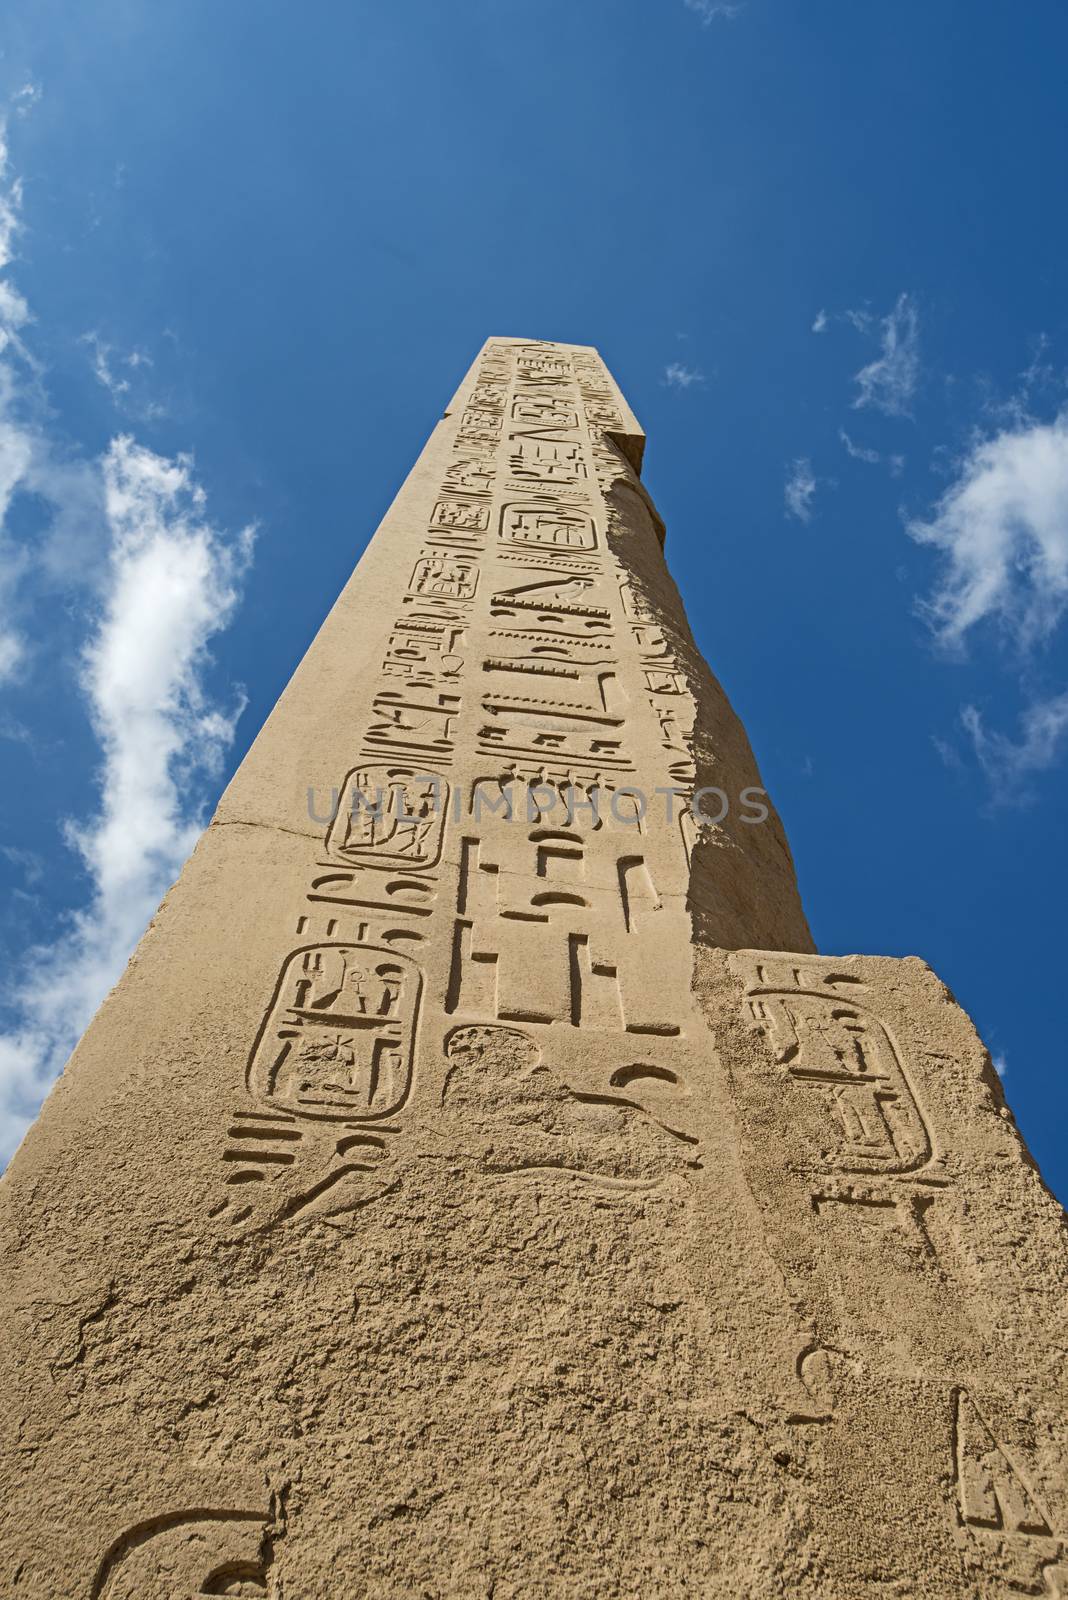 Large tall ancient egyptian obelisk at the temple of Karnak in Luxor with hieroglyphic carvings on blue sky background